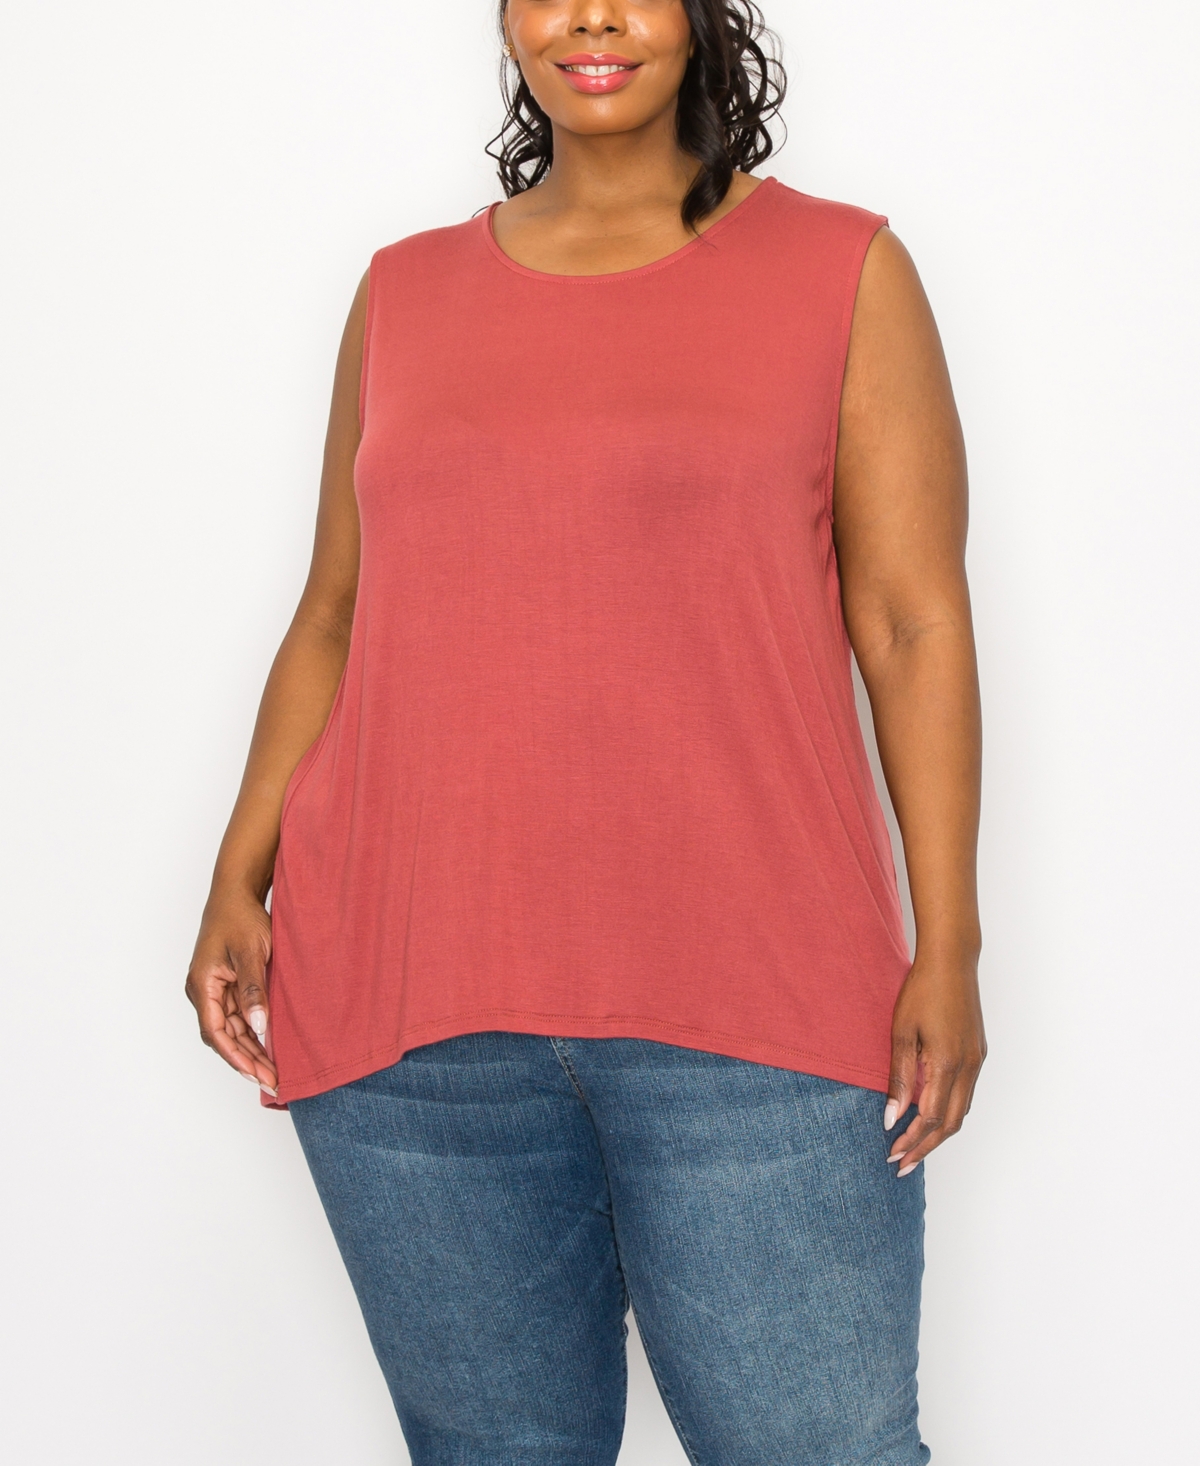 Coin 1804 Plus Size Rayon Span Keyhole Button Back Tank Top In Brick Pale